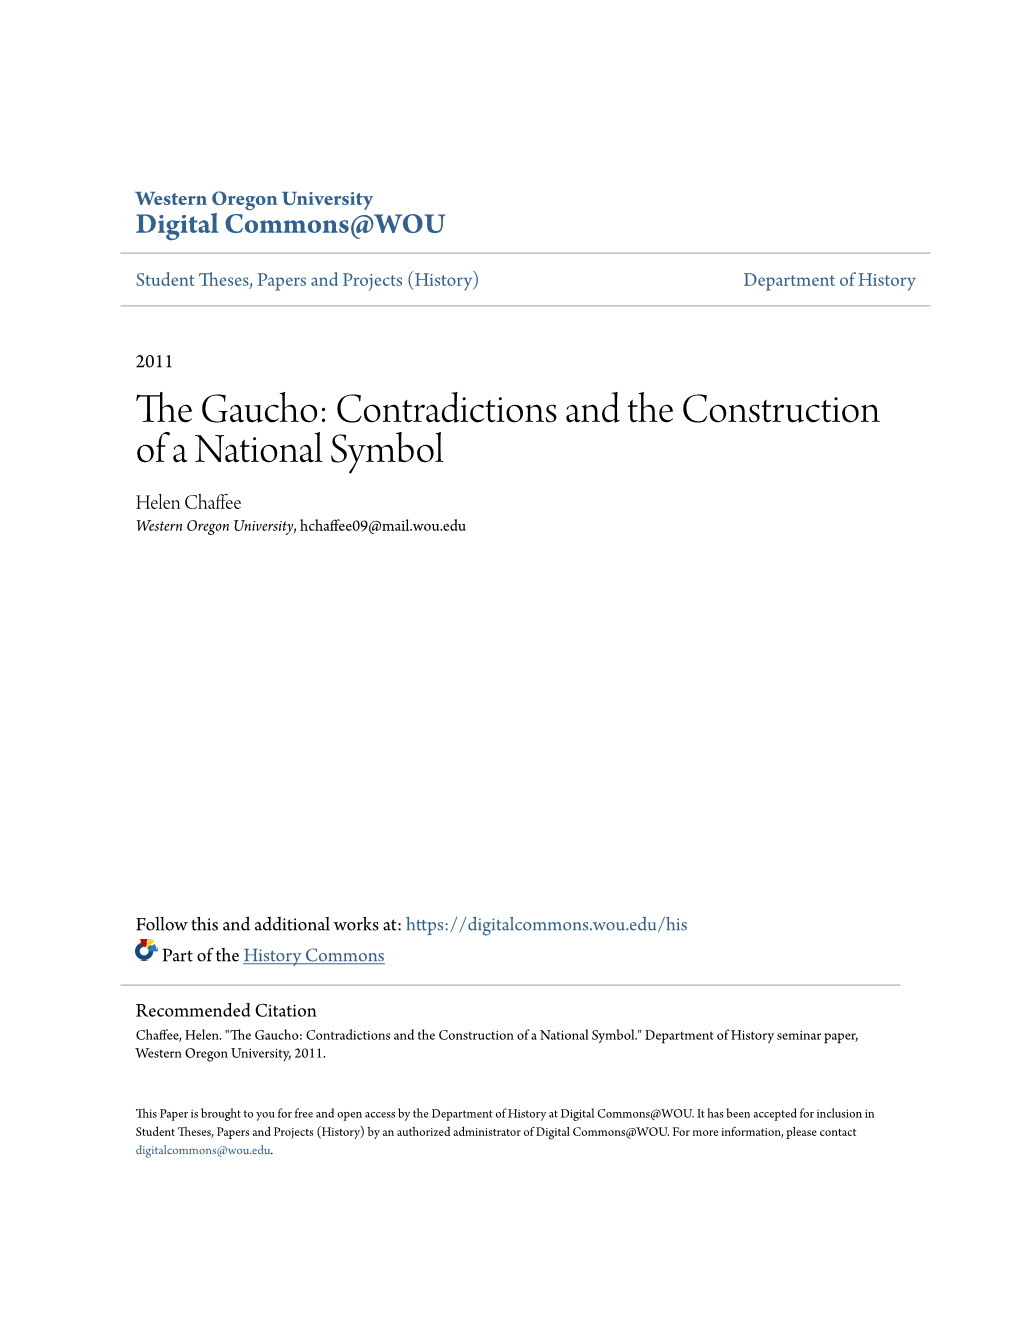 The Gaucho: Contradictions and the Construction of a National Symbol